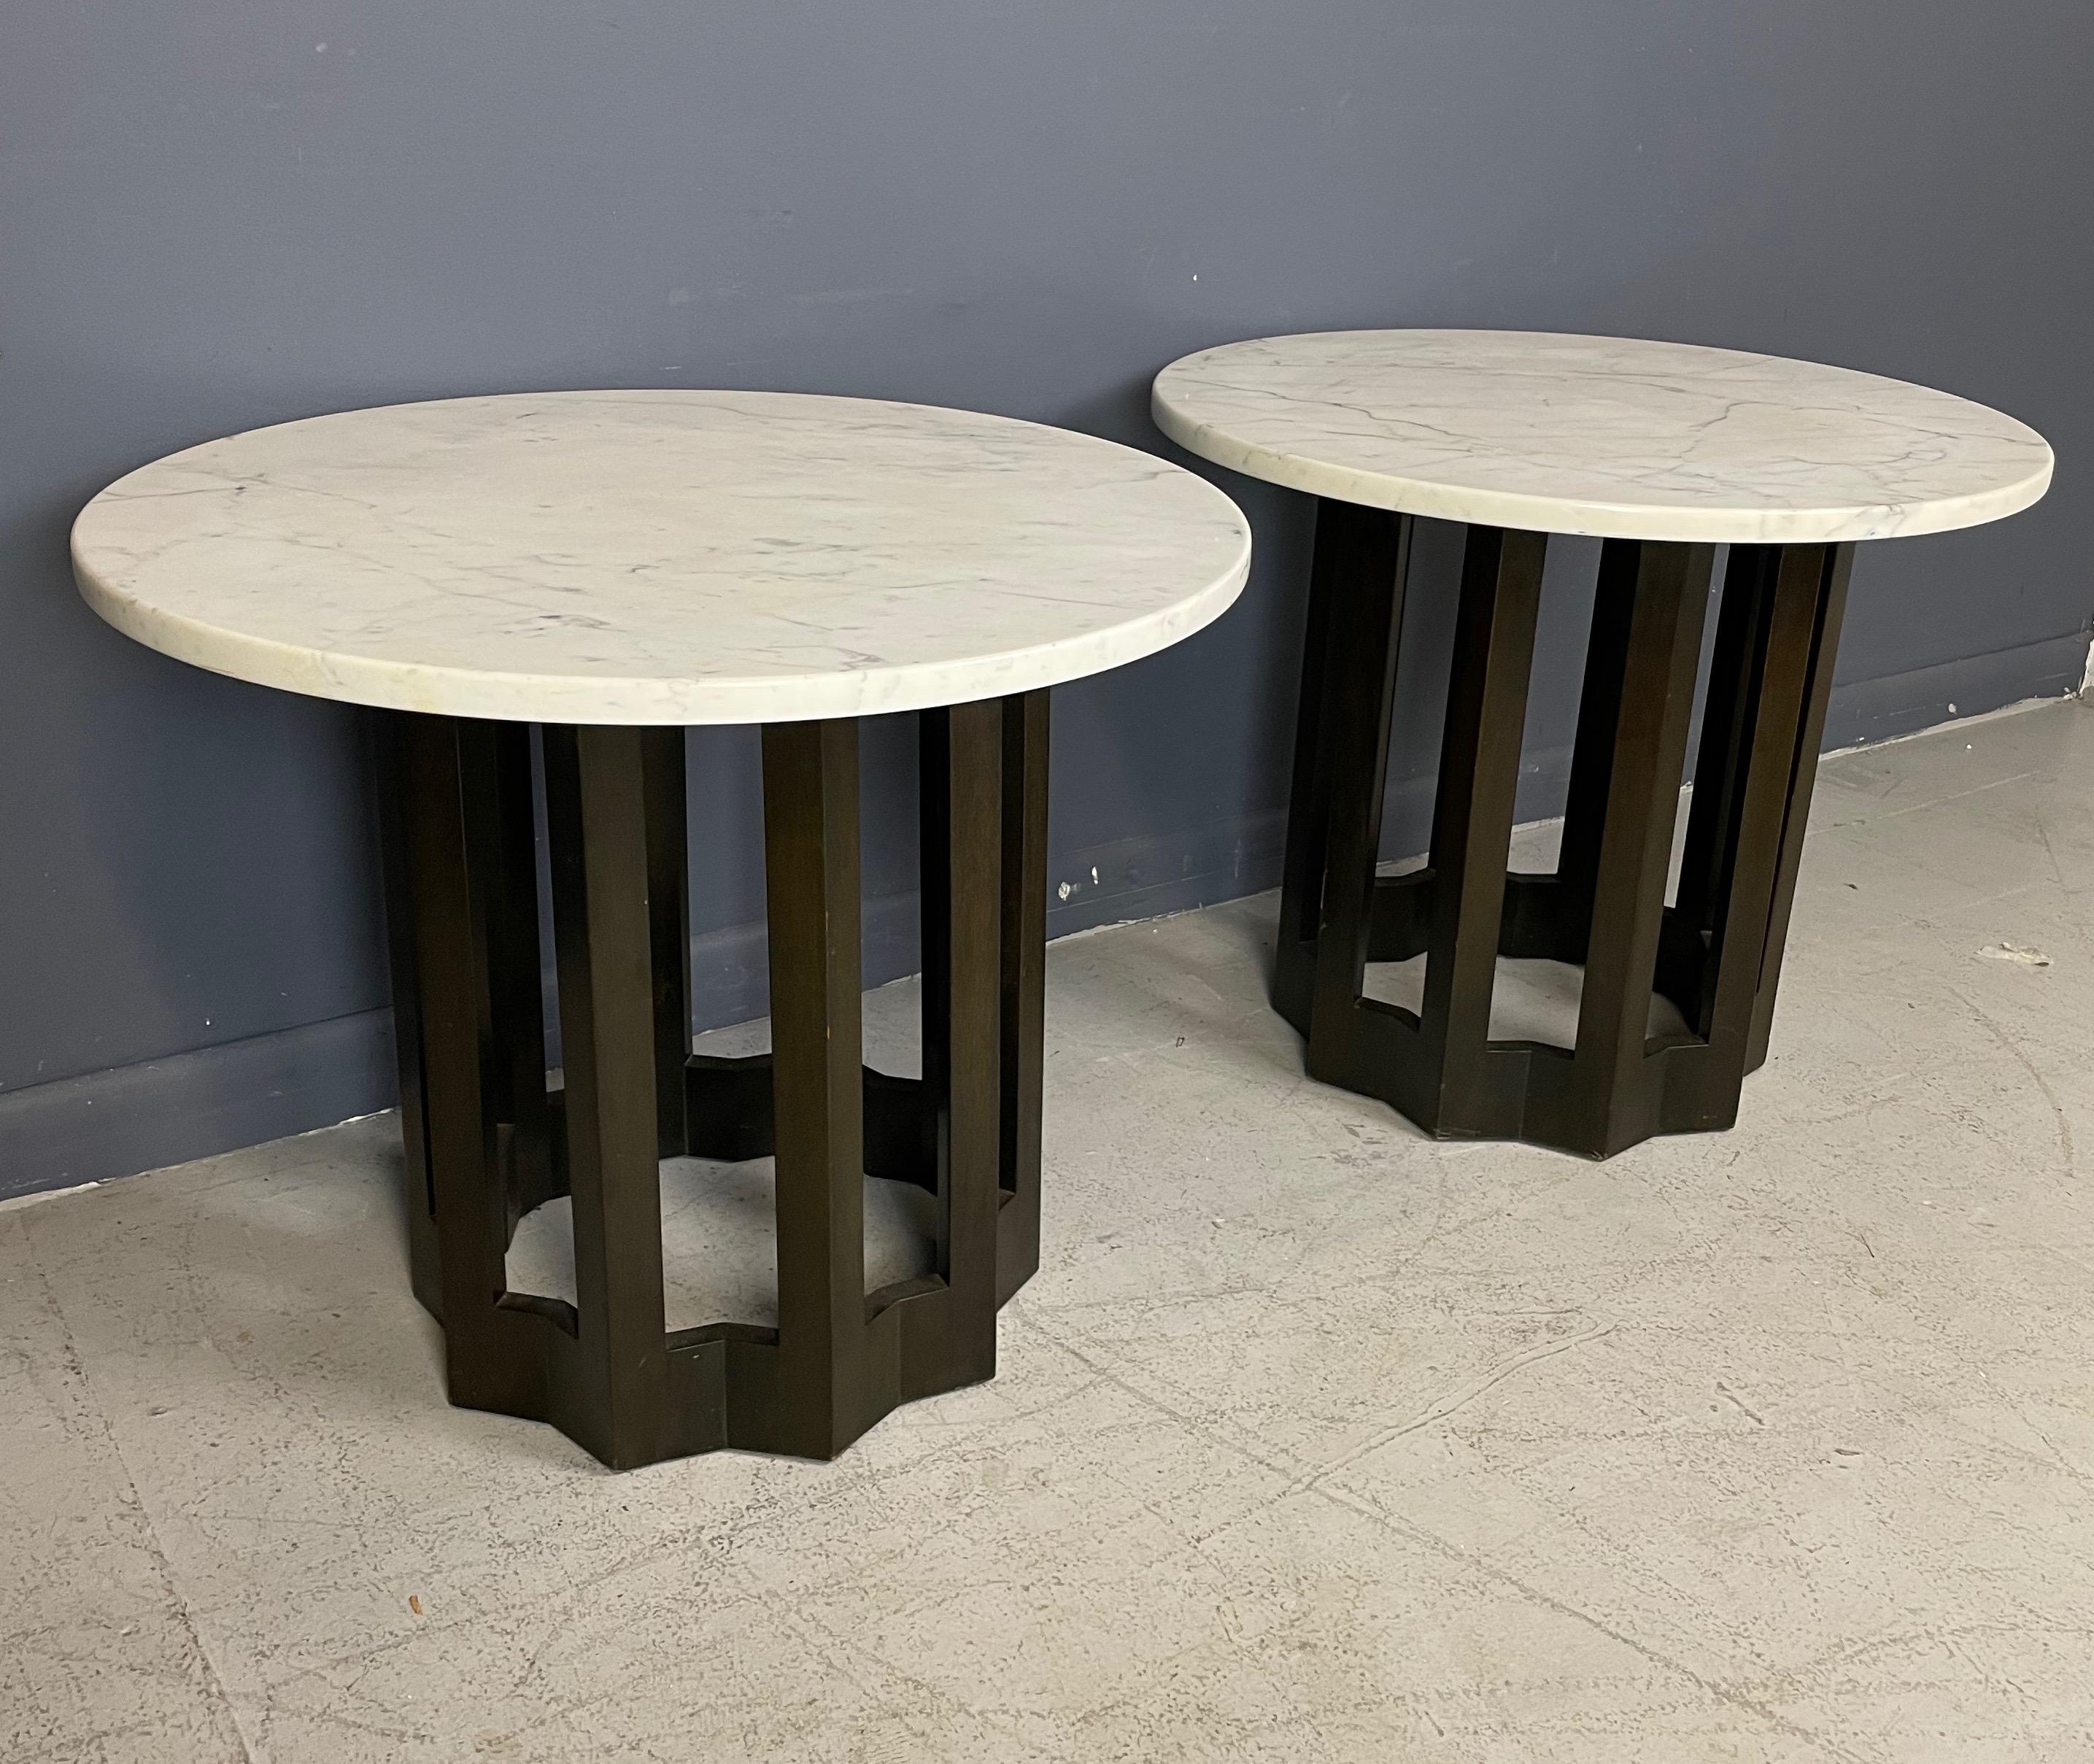 Classic Harvey Probber, this walnut undulating base is a signature Probber design married with a Carrara marble top, these tables are showstoppers!